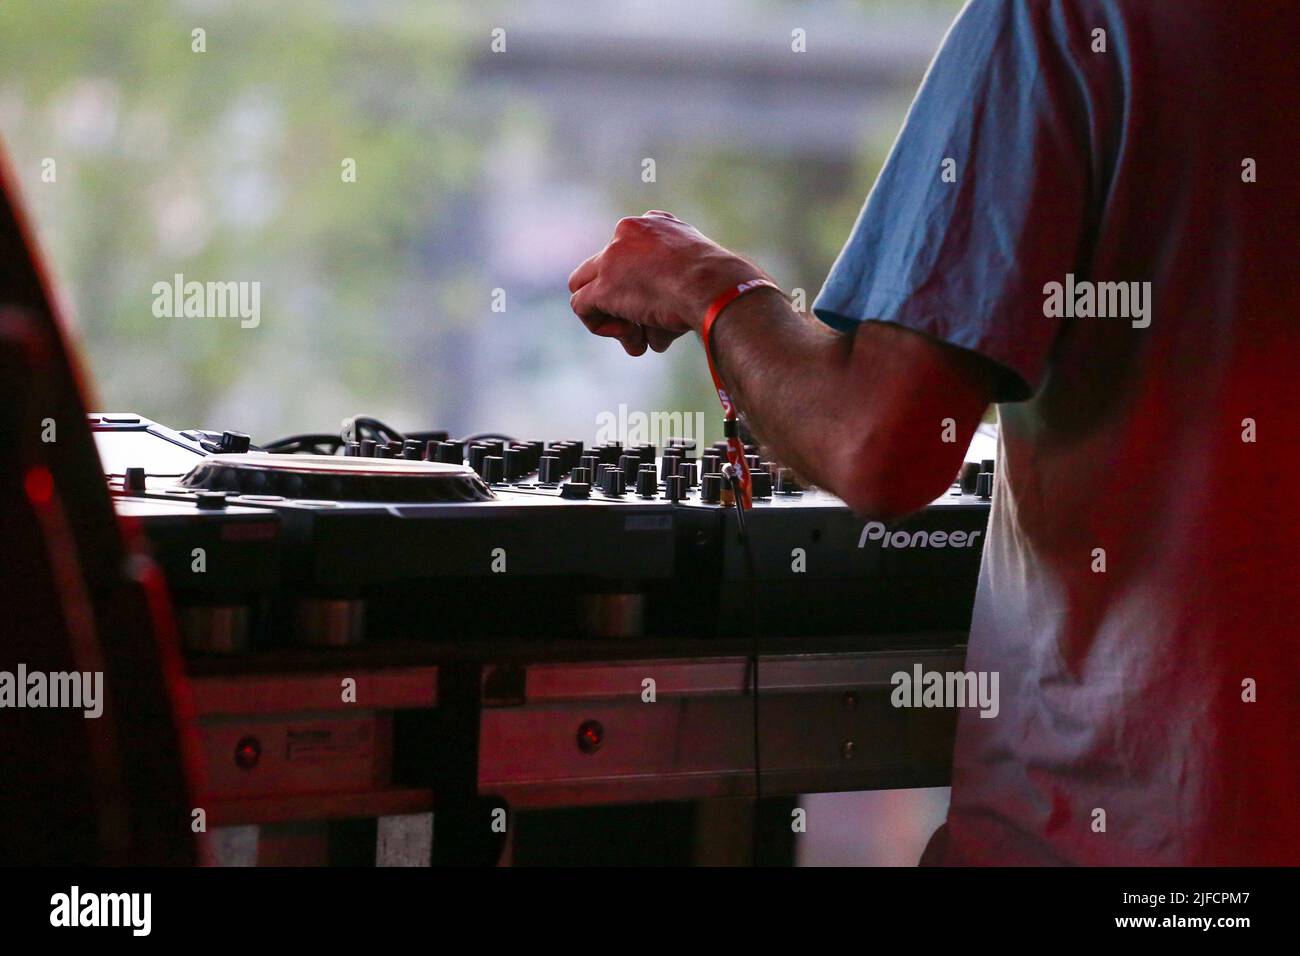 Turin, Italy. 01st July, 2022. TURIN, ITALY - 01 JULY 2022. A dj during the  Kappa FuturFestival 2022 on 01 July 2022 at Parco Dora in Turin, Italy. The  electronic music festival